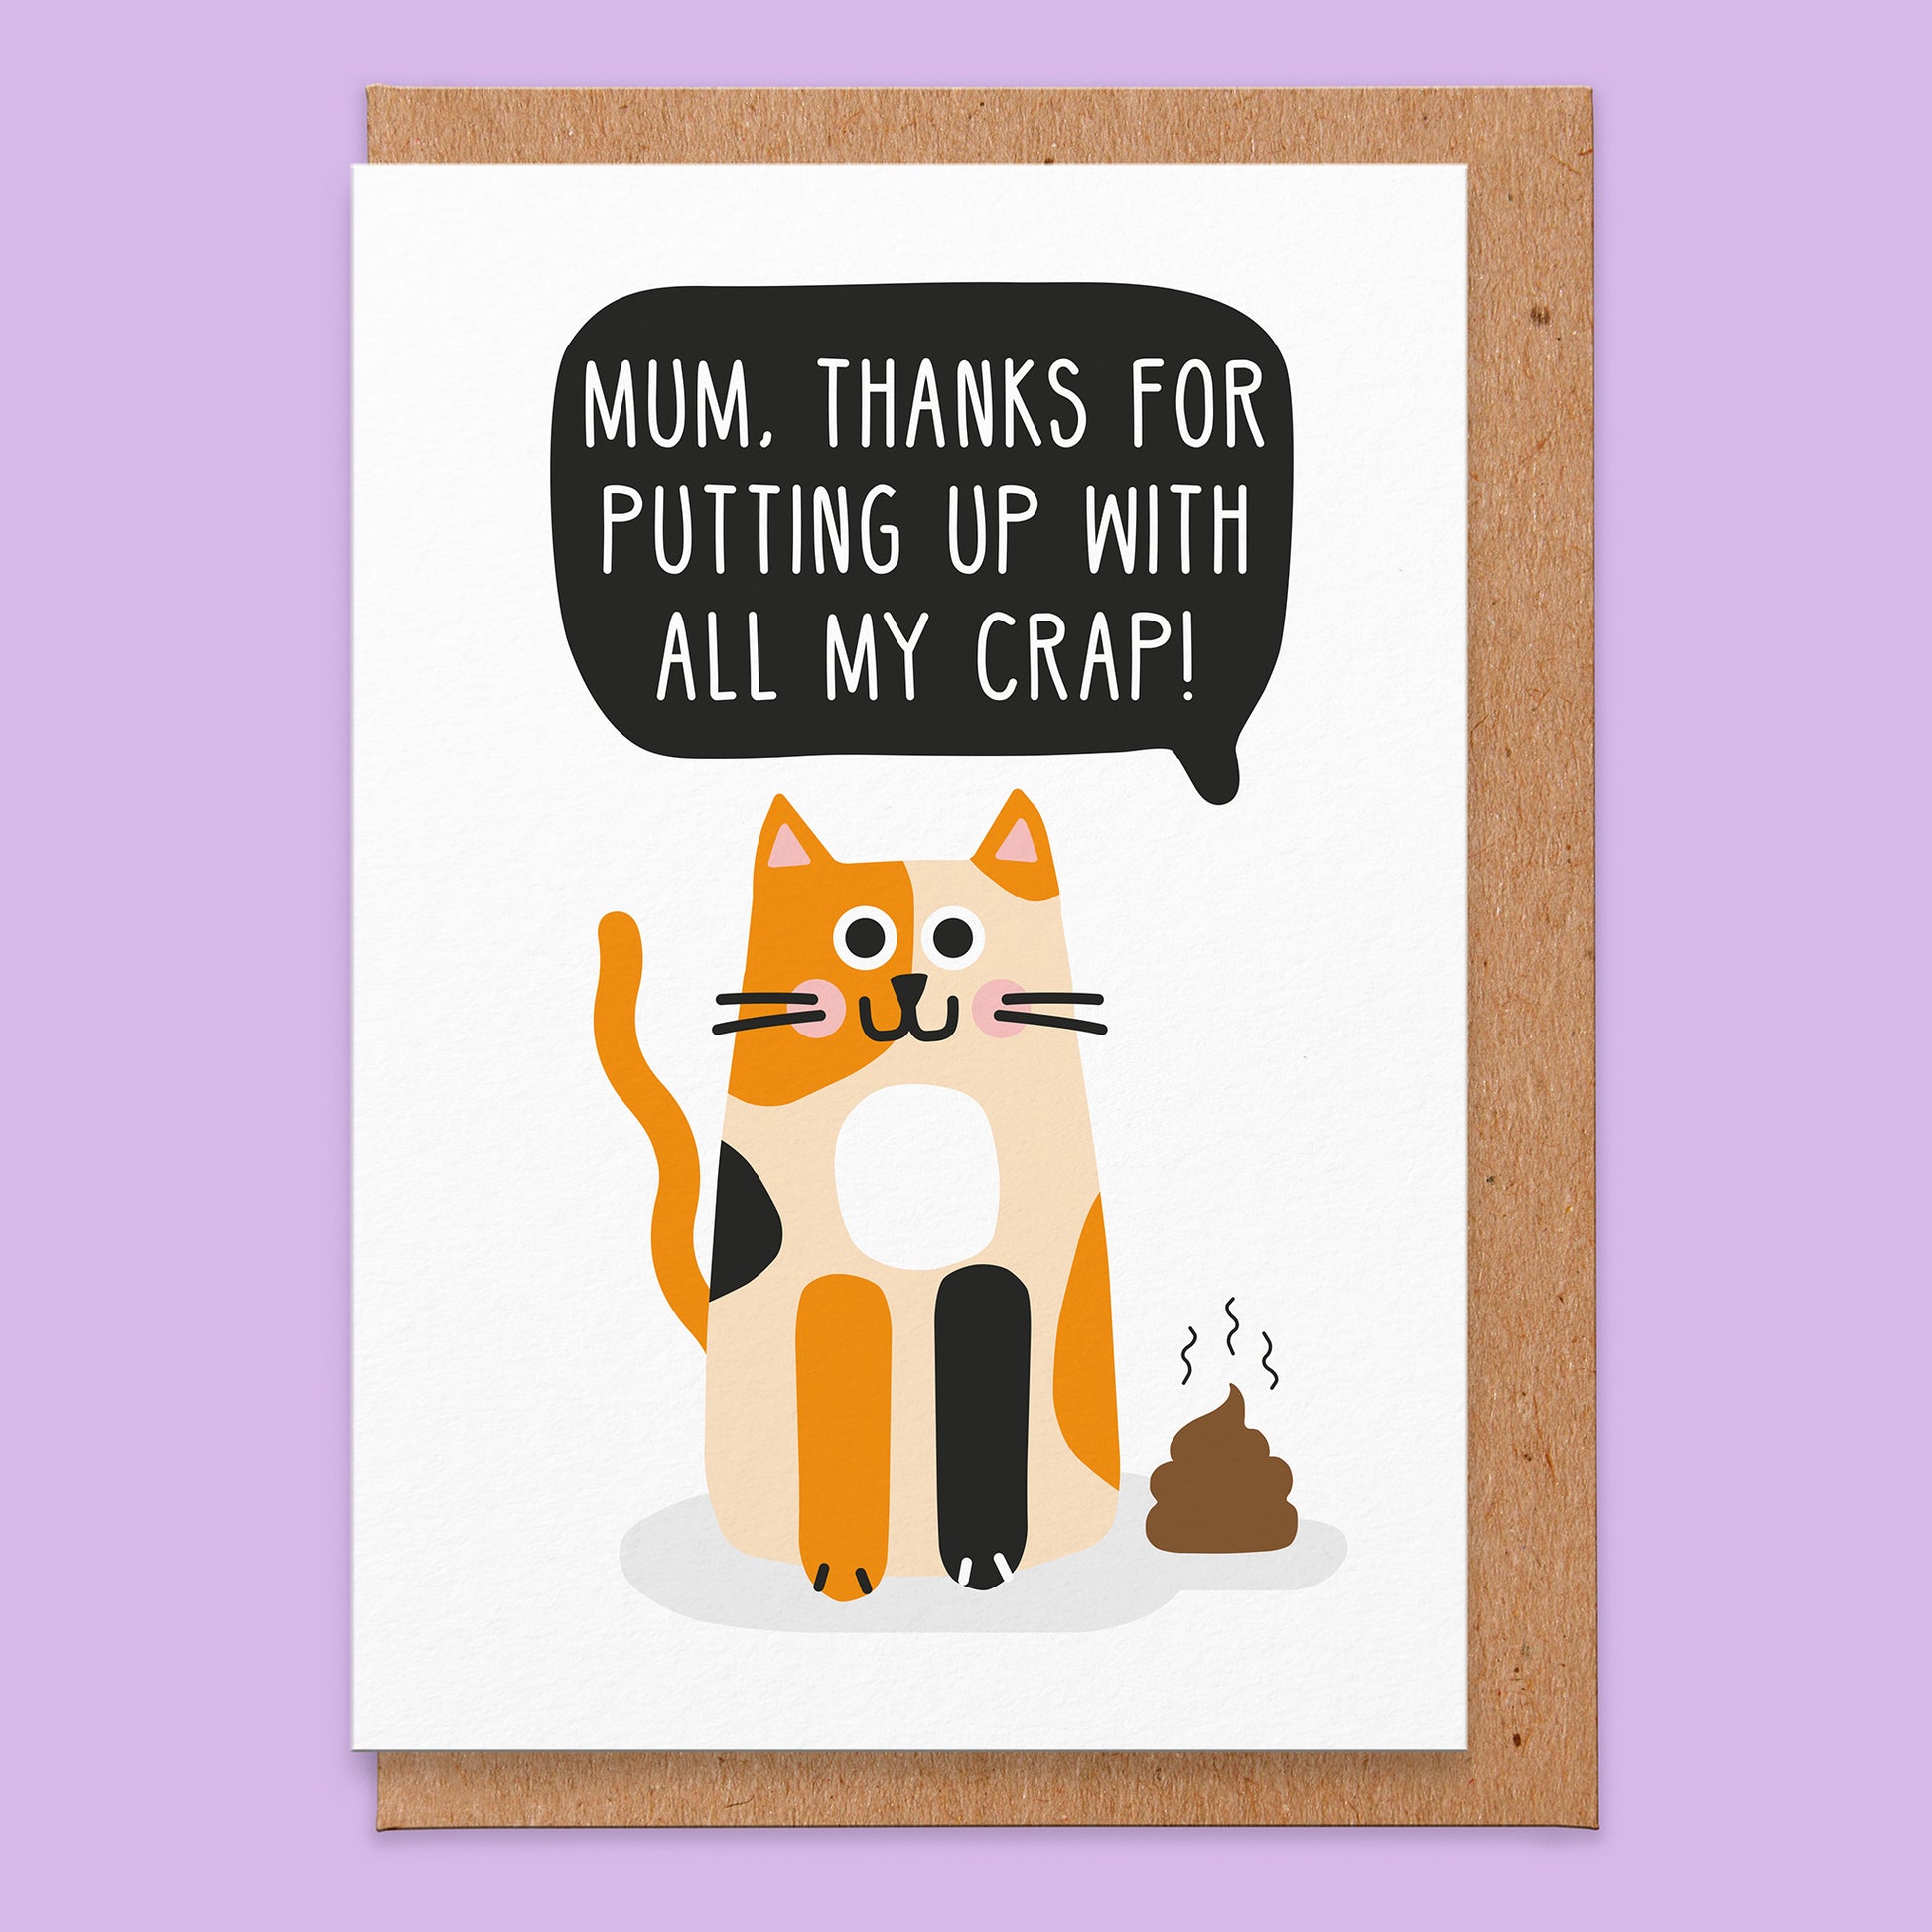 Greetings card that reads mum thanks for putting up with all my crap! And an illustration of a cat.